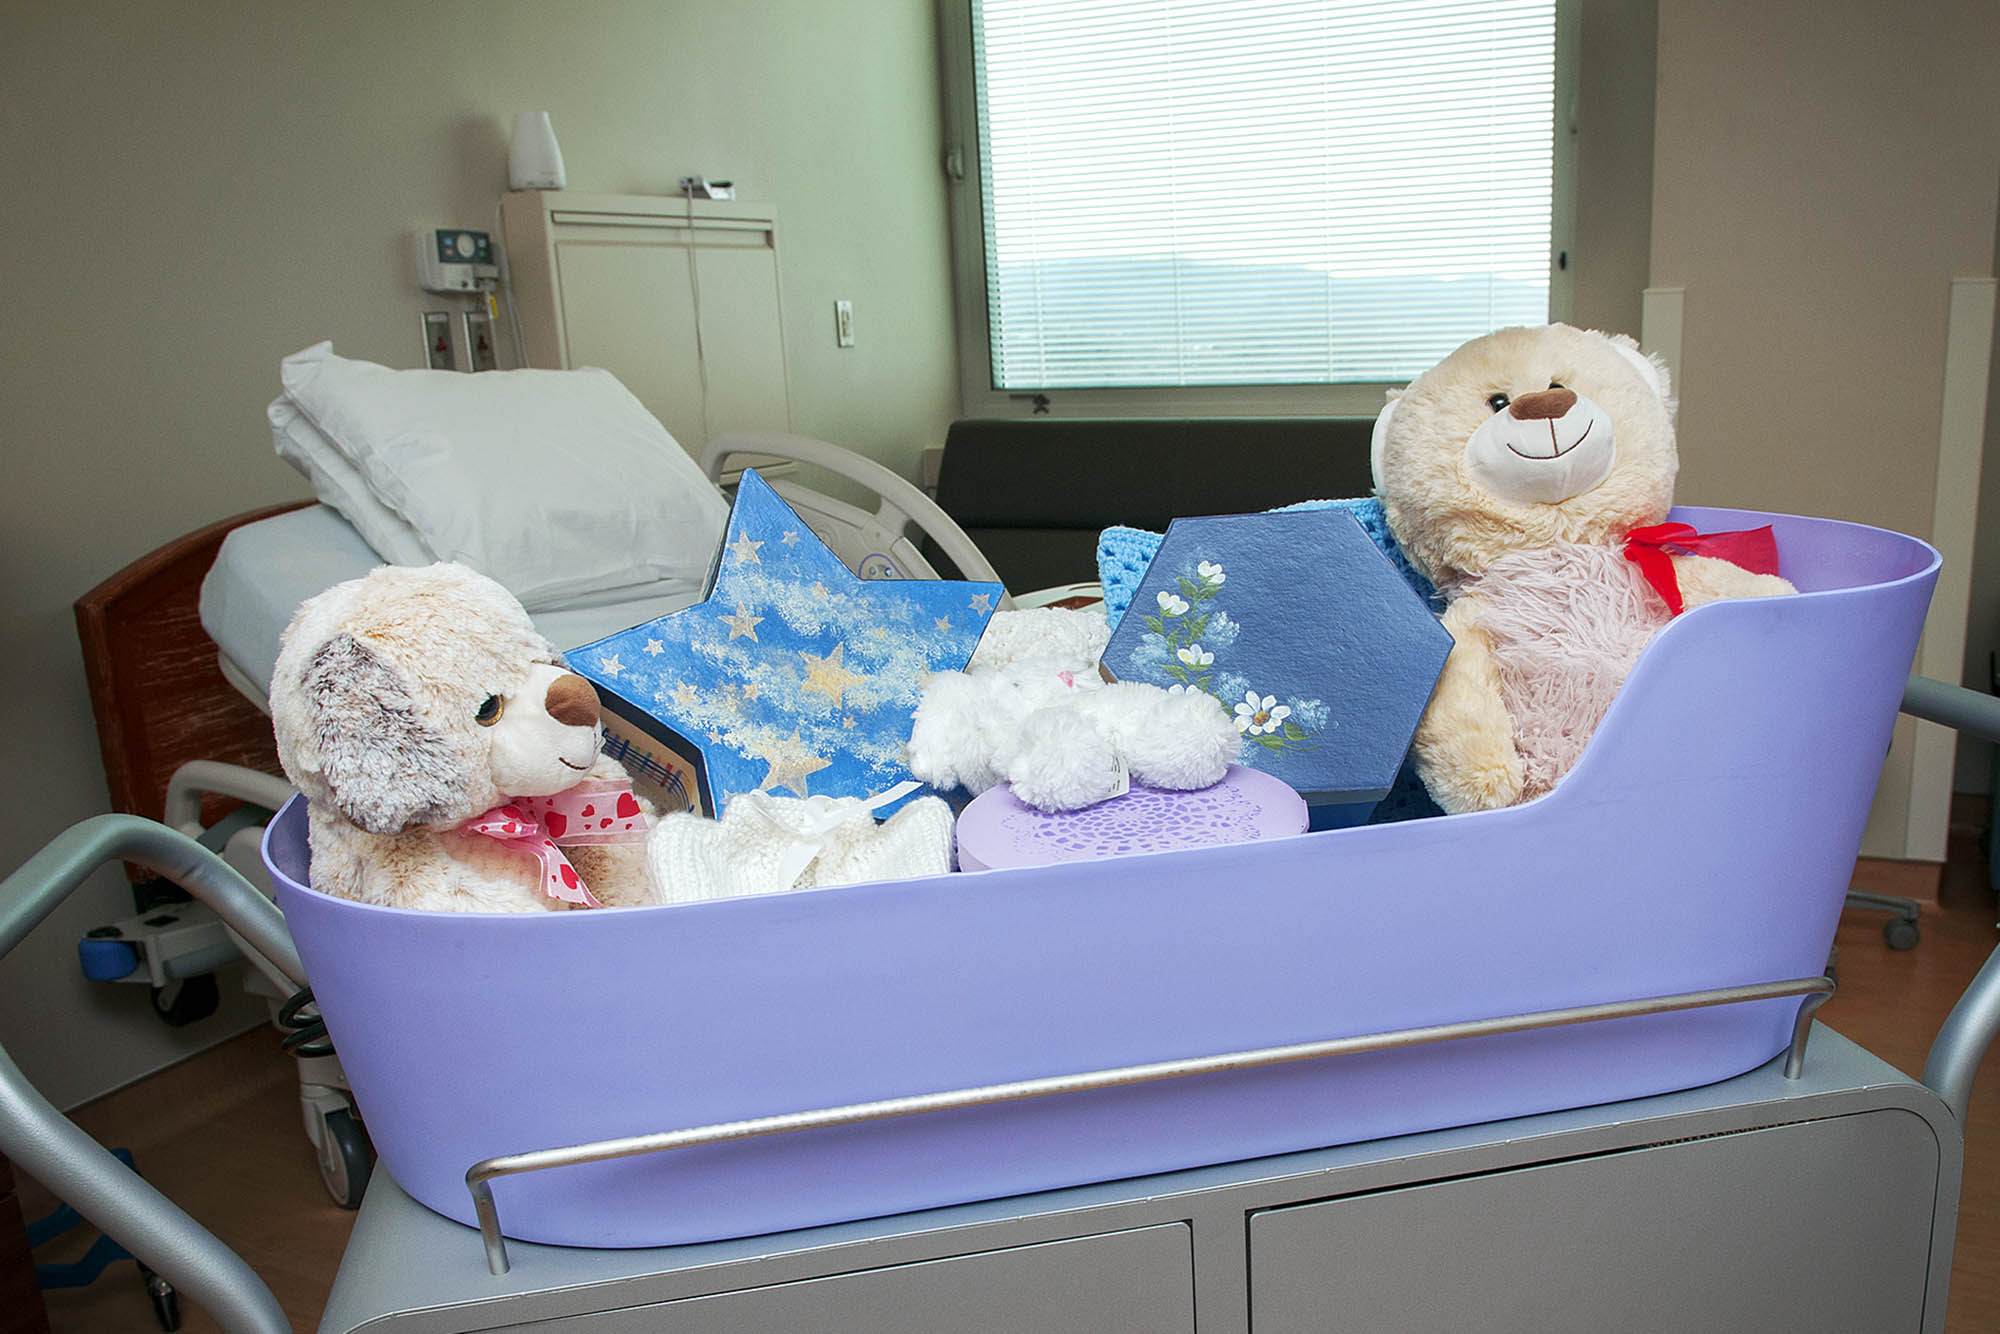 Baby cradle filled with stuffed animals and memory-making kits